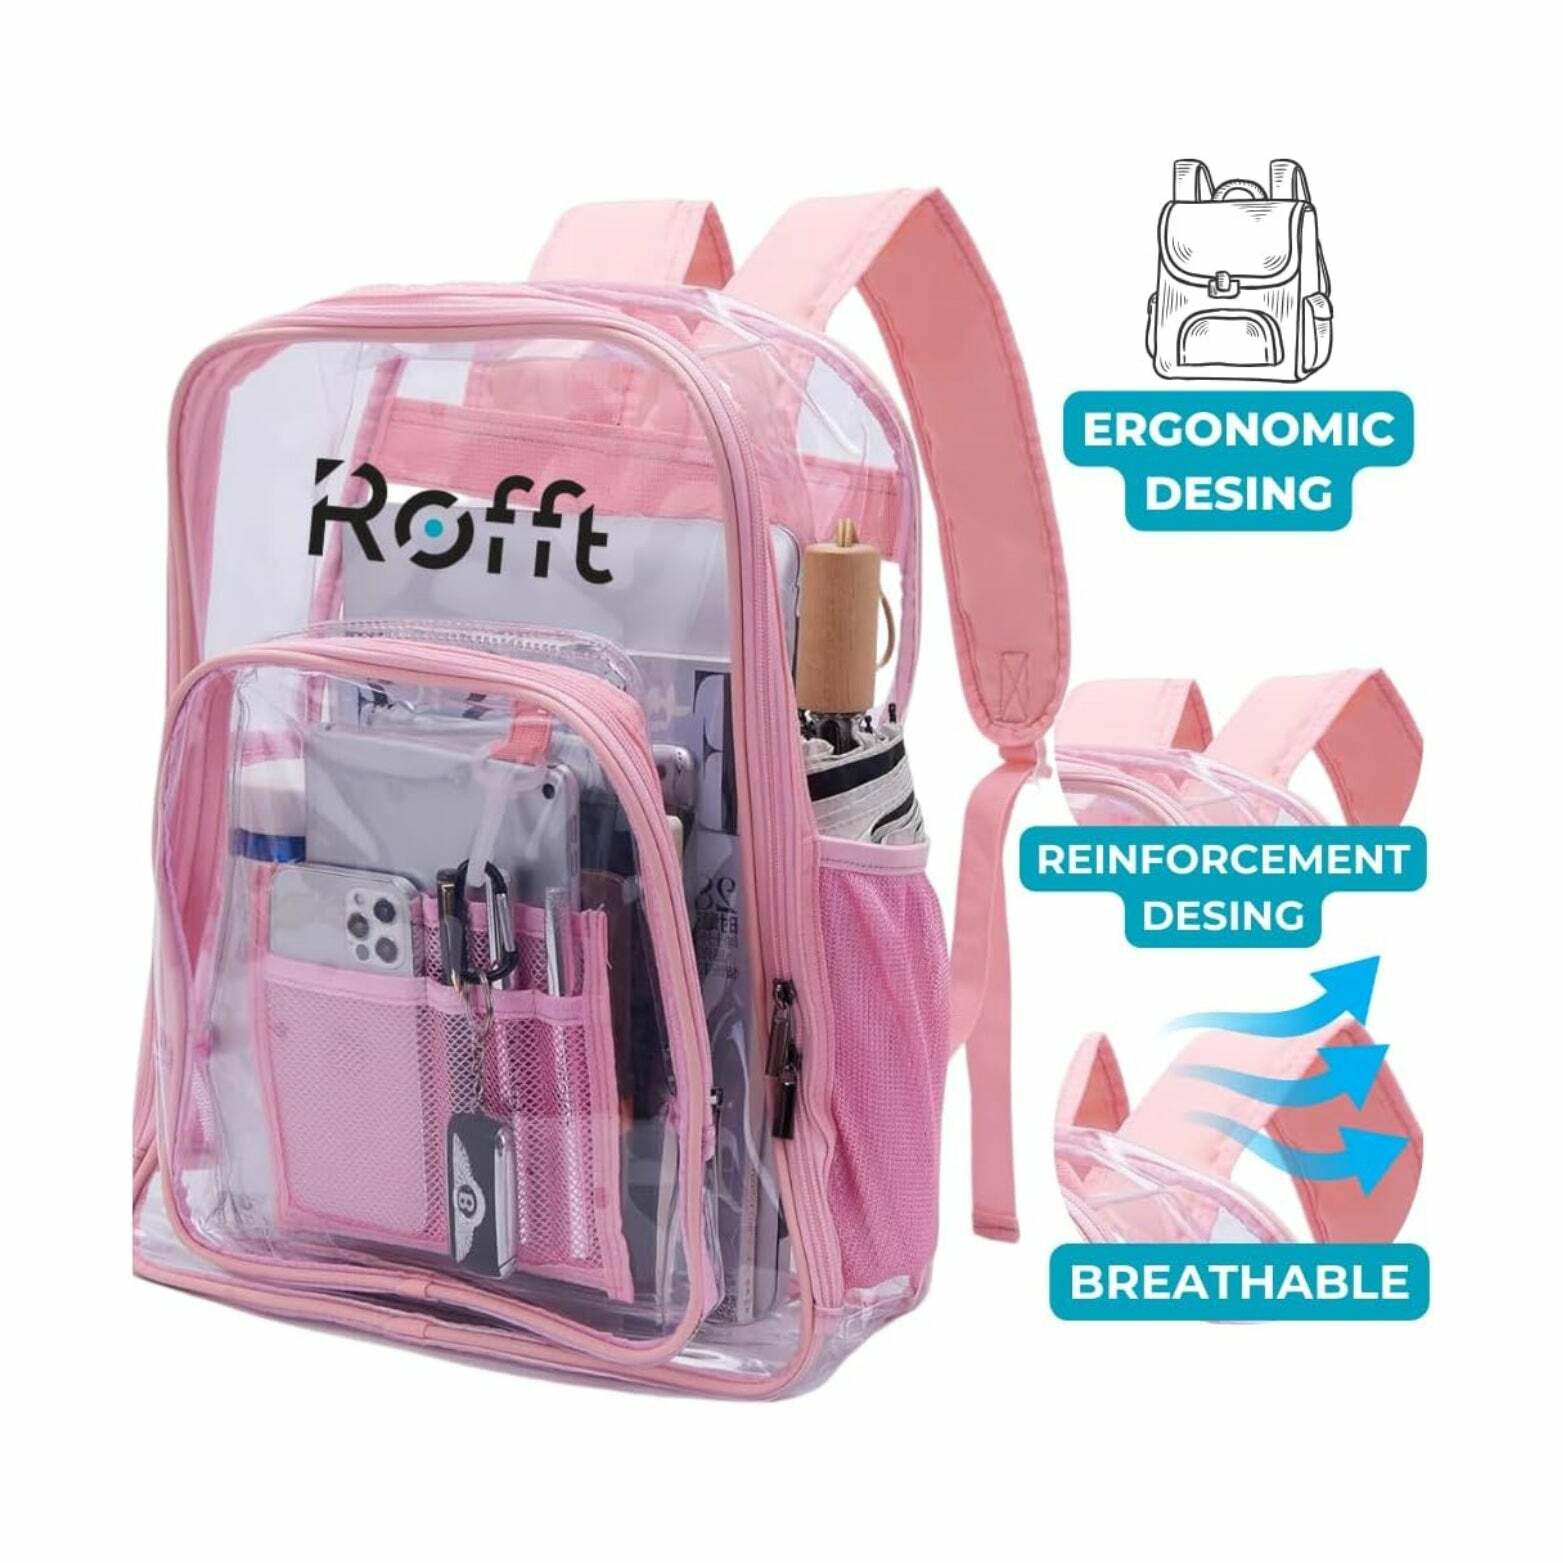 ROFFT Medium Clear Backpack - Durable PVC with Reinforced Straps and Multiple Pockets, Pink